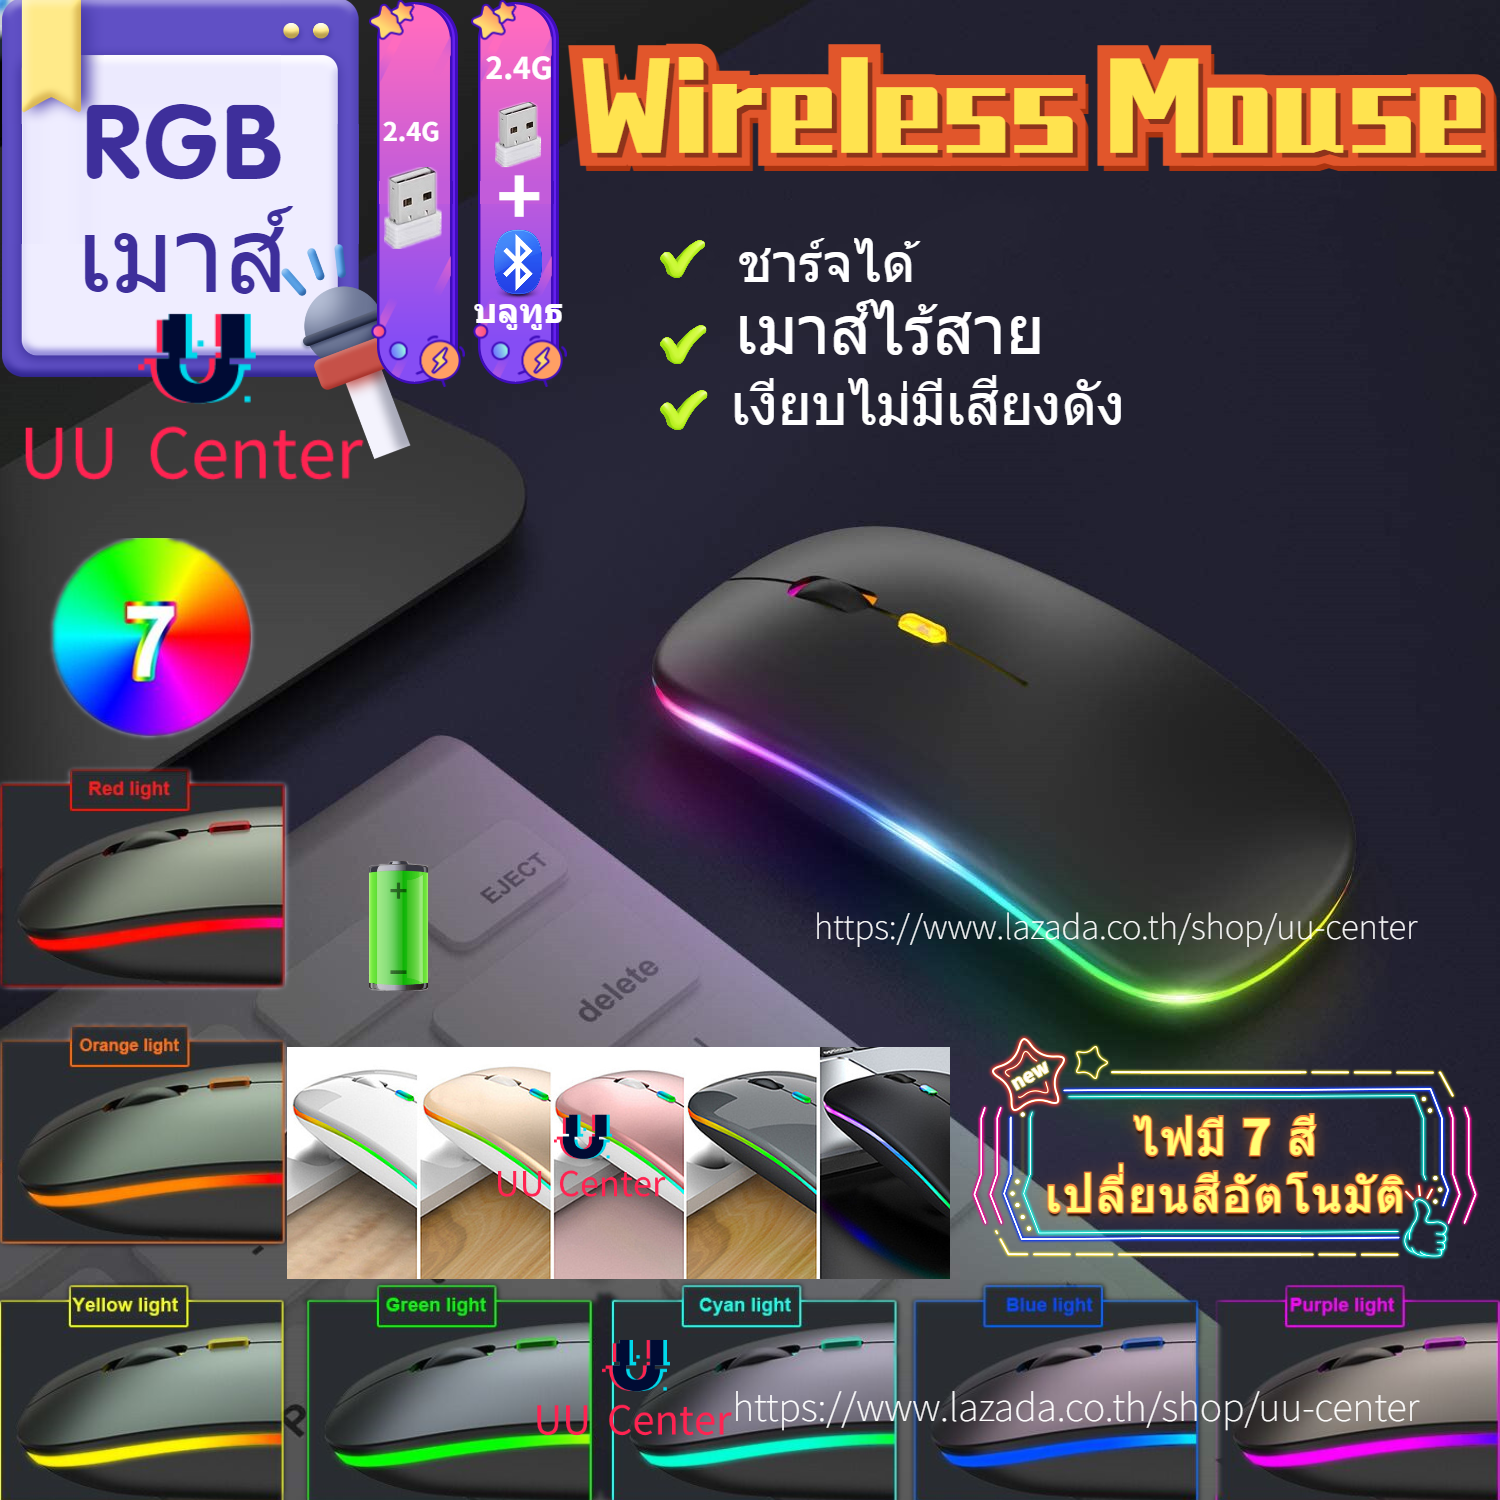 🔸UU🔸[Wireless mouse]2.4G wireless mouse/rechargeable mouse/mice/เมาส์ไร้สาย for laptop/computer/mobile mouse/mice 2.4GHz Wireless Silent Mouse RGB Backlight DPI 1000-1600 M1